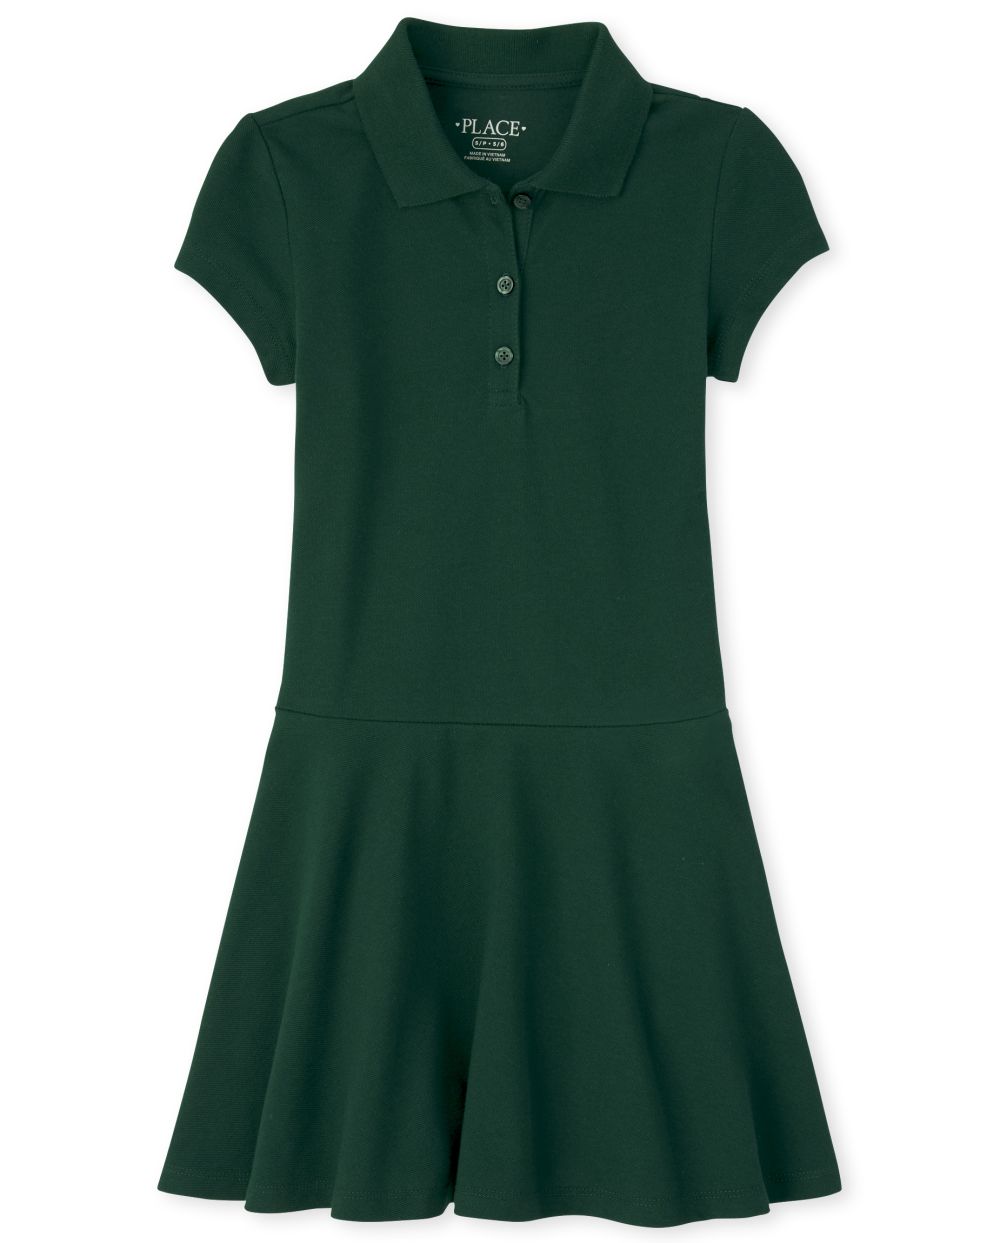 Girls Collared Above the Knee Button Front Short Sleeves Sleeves Dress